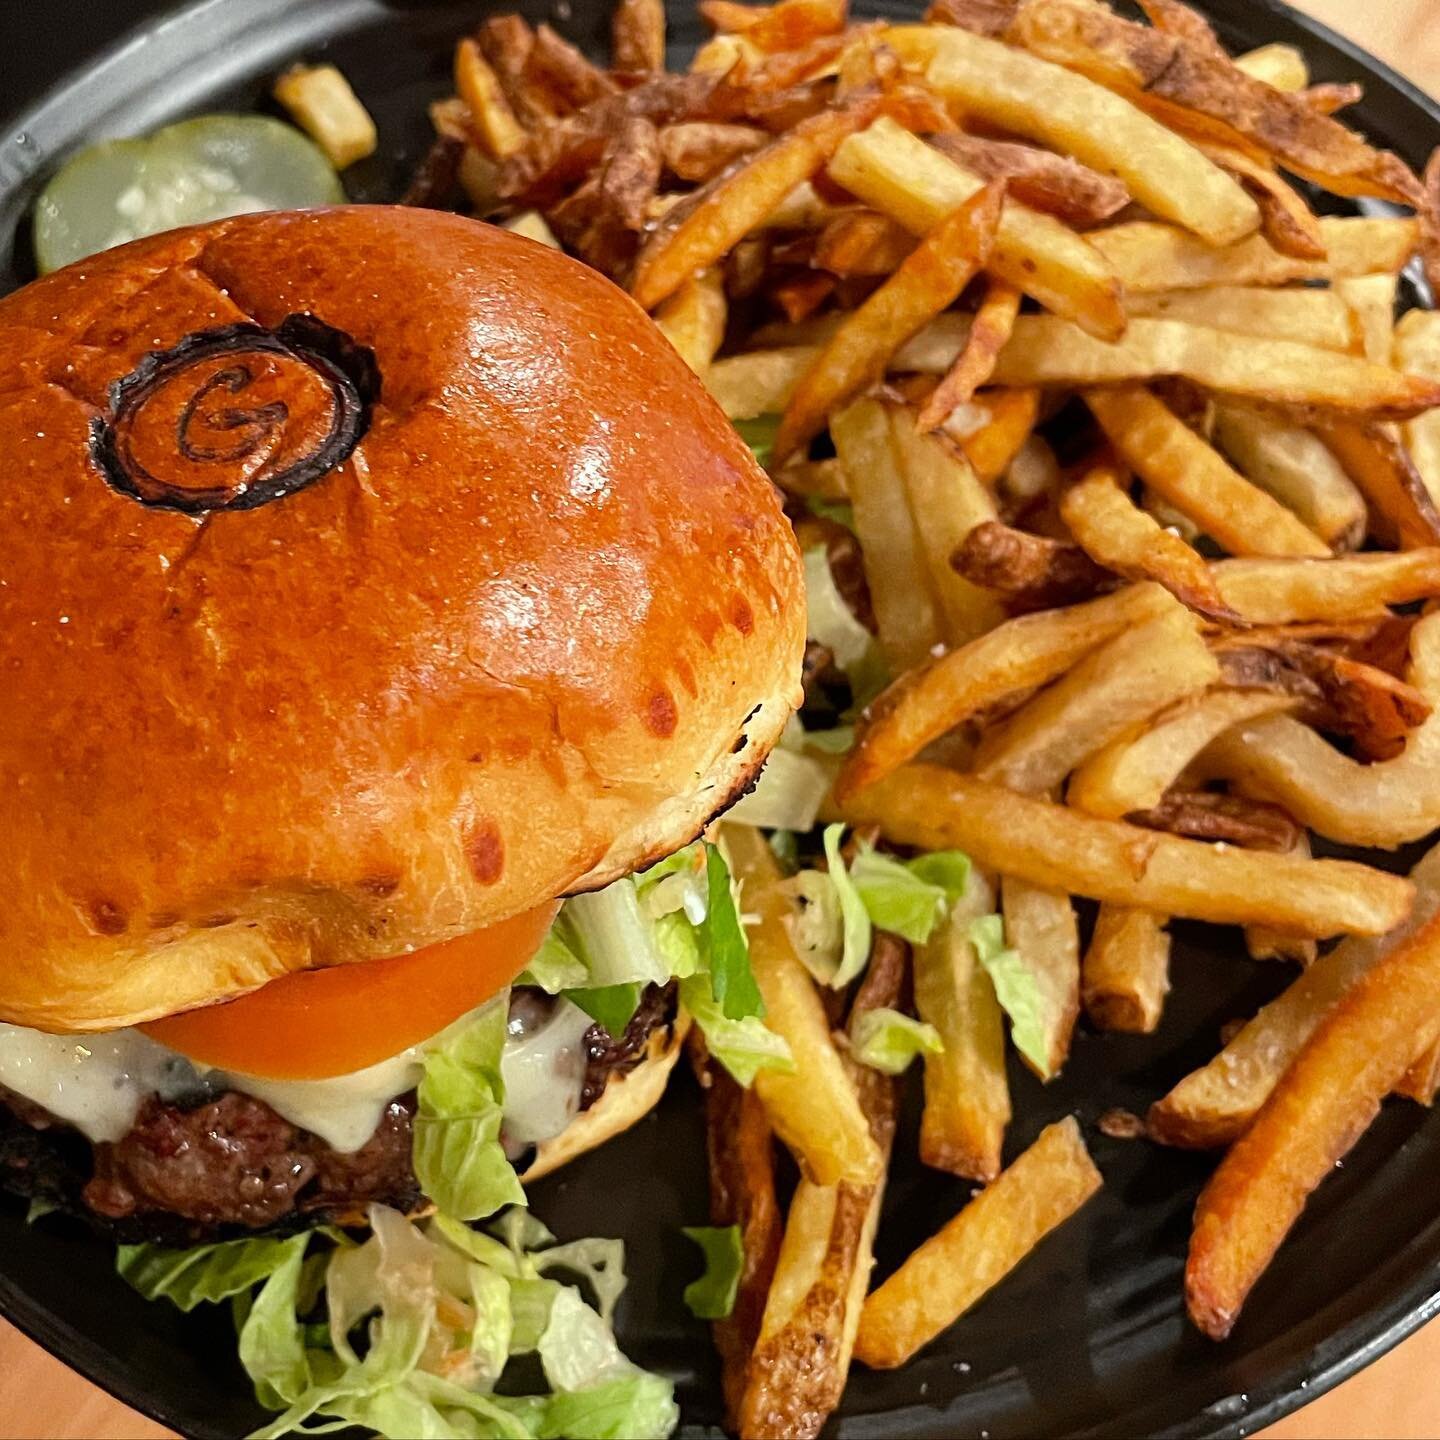 🍔Weekend VIBES calls for it so YOU go get it!  Best BURGER and Freshest Homemade Fries in town are @littlegeatery 
Join us no reservations needed! 
Serving dinner til 10pm! 
Bar 🍺 open until 11pm.

☄️Takeout 781-584-8540 

#best #bestburger #bestbu